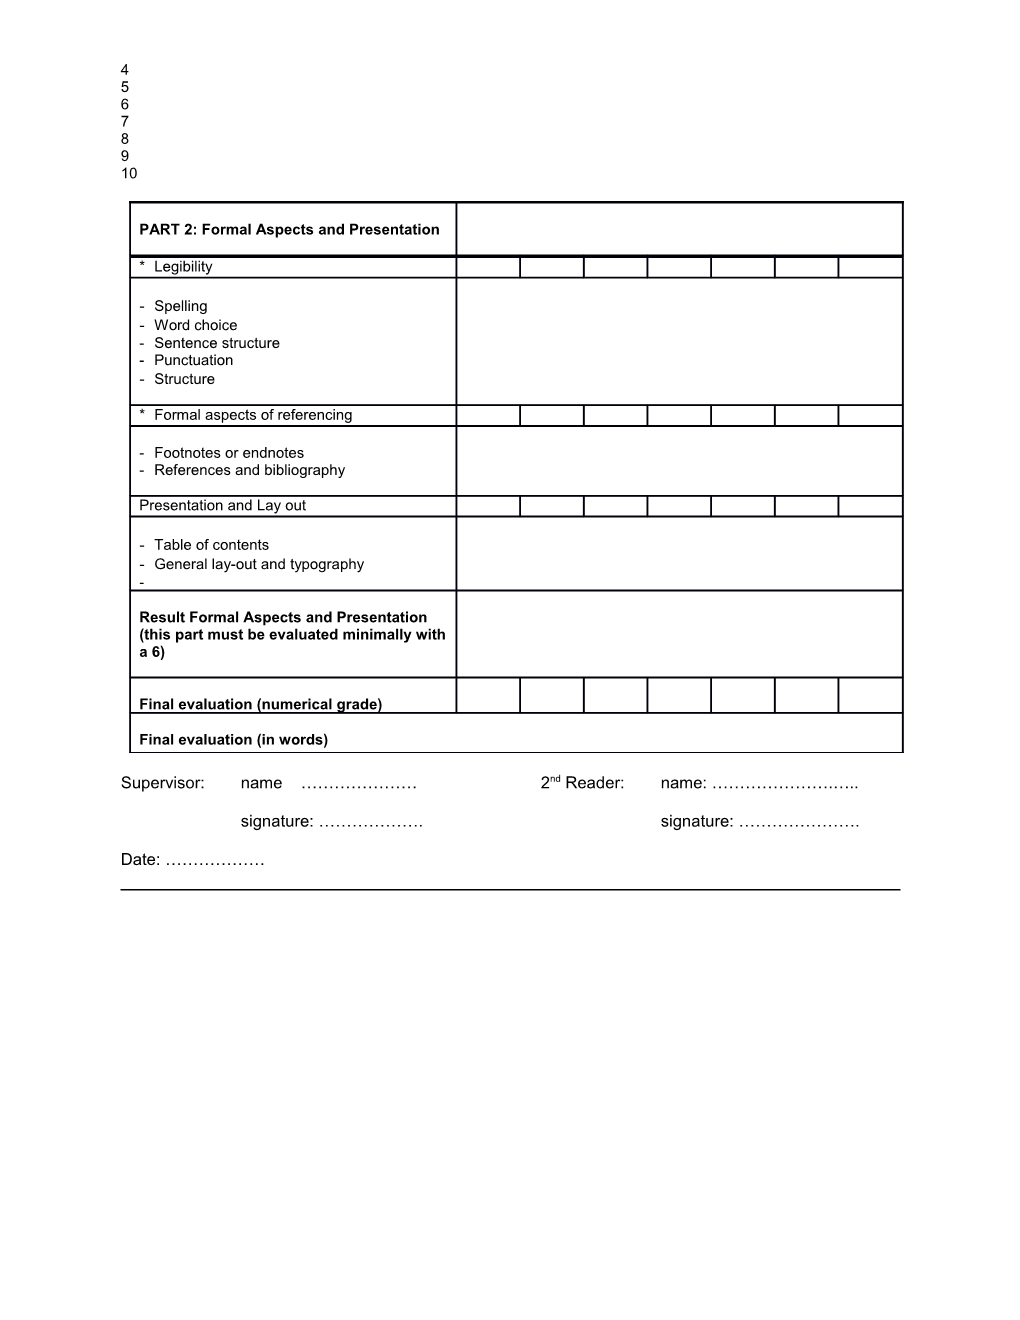 Thesis Evaluation Form Msc in Political Science CAMPUS the HAGUE 2016-2017 (10 Ects)